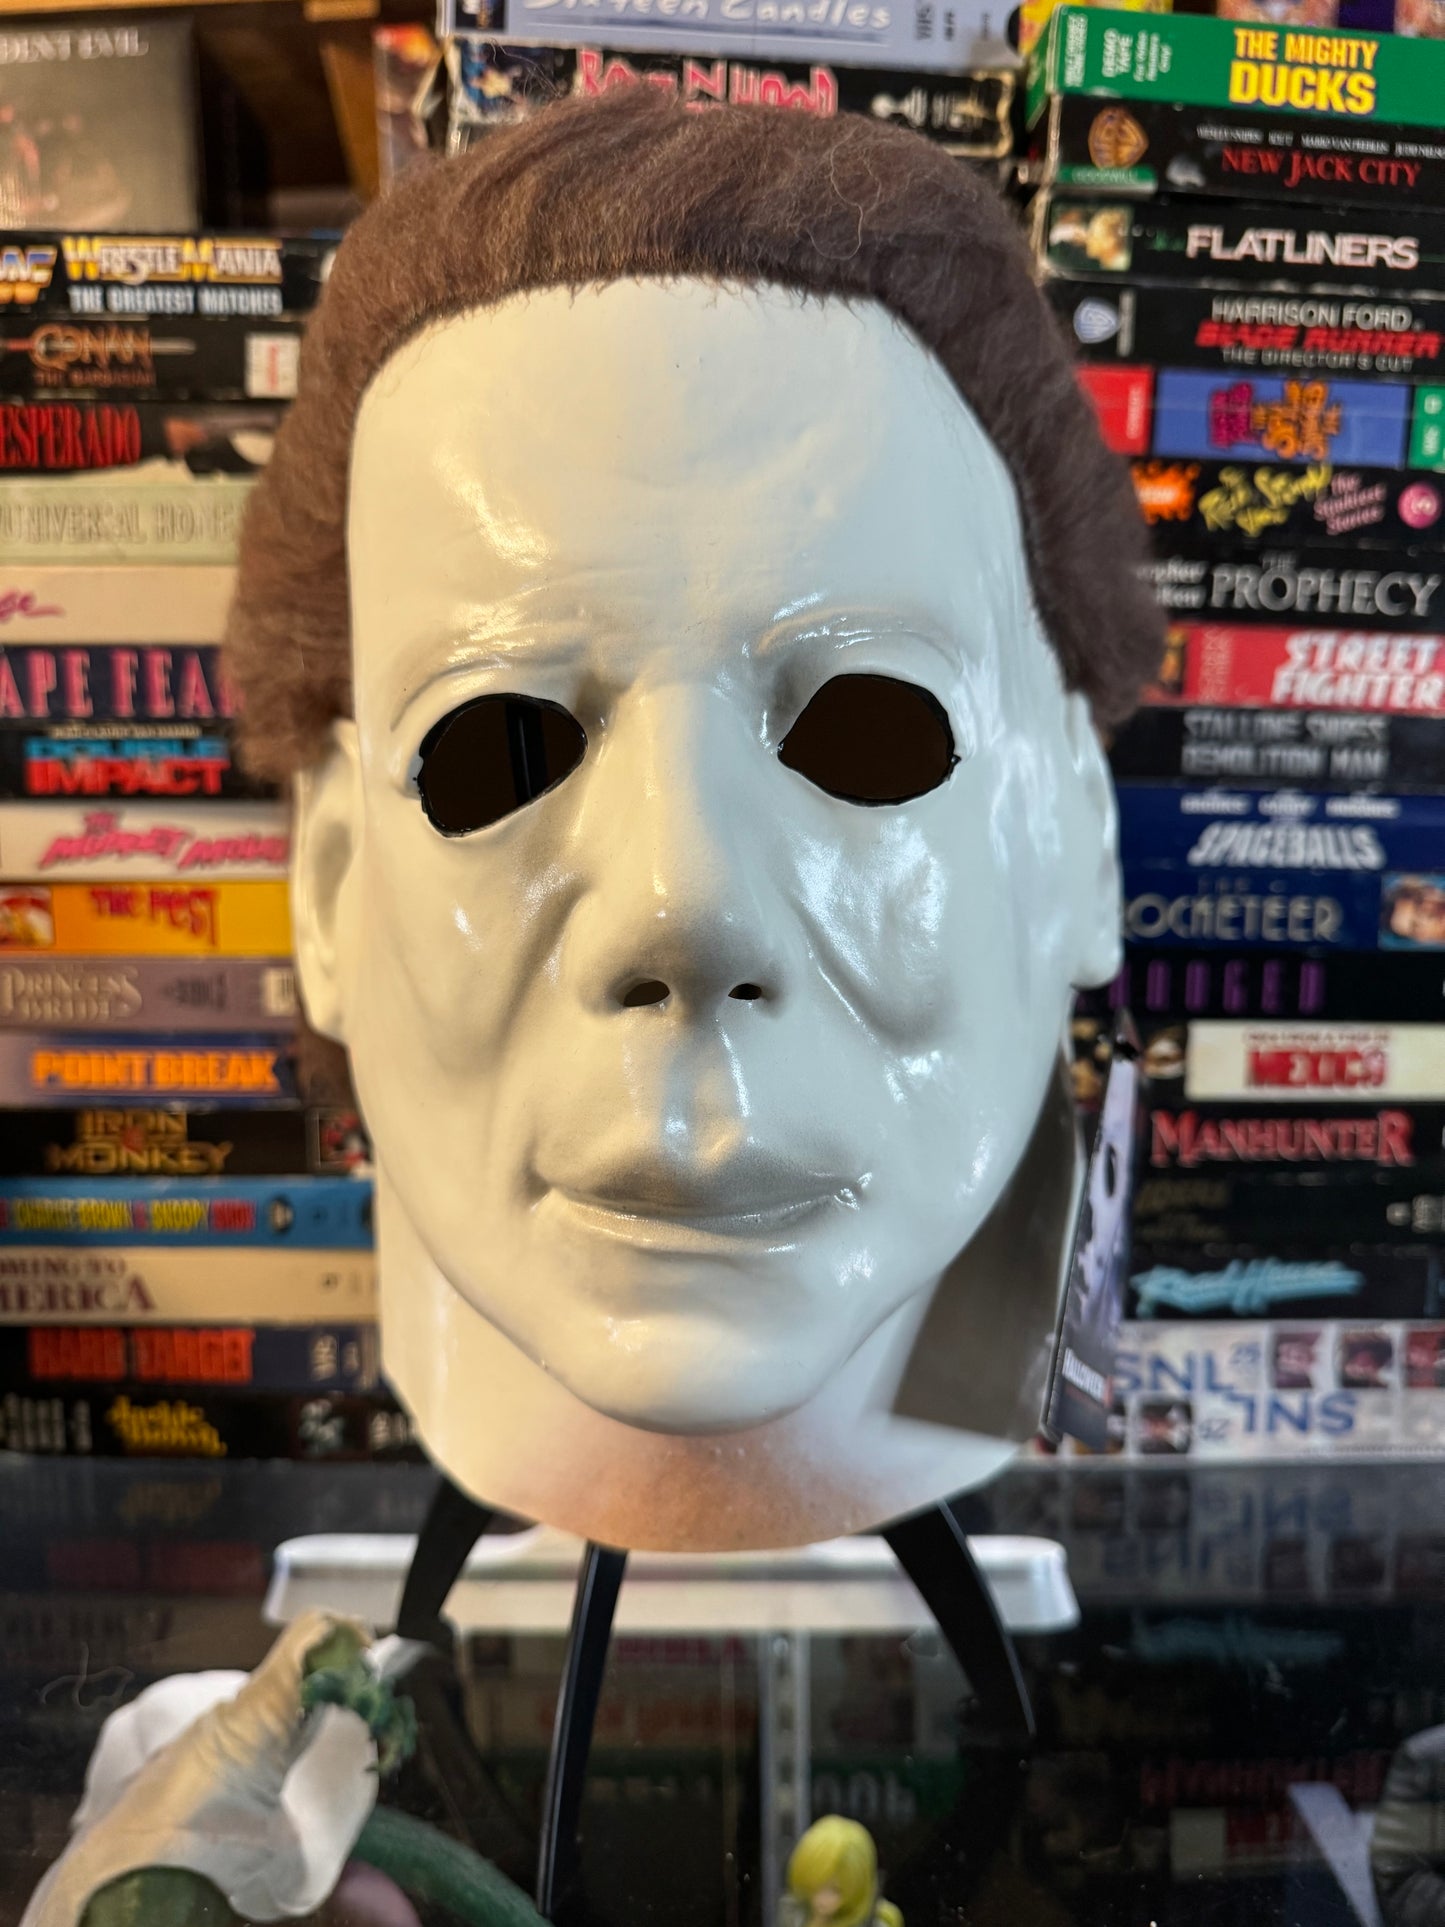 HALLOWEEN 4: THE RETURN OF MICHAEL MYERS - POSTER MASK